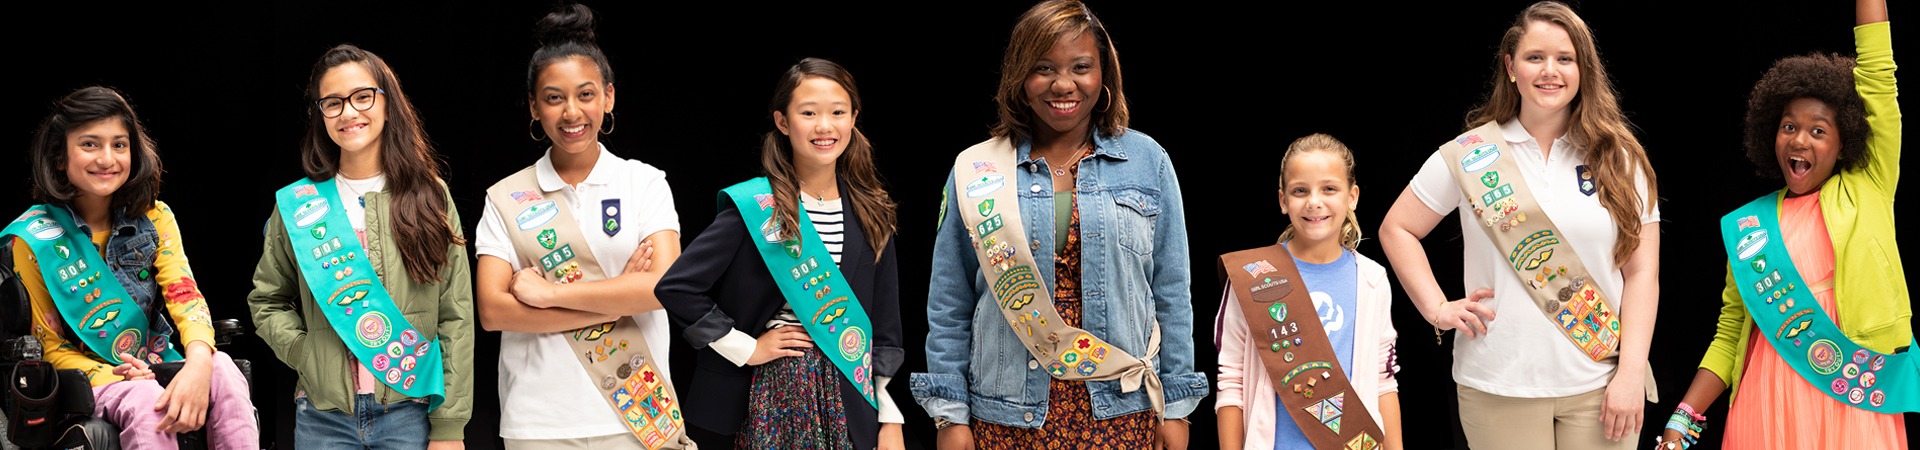  Girl Scouts of different ages and ethnicities  